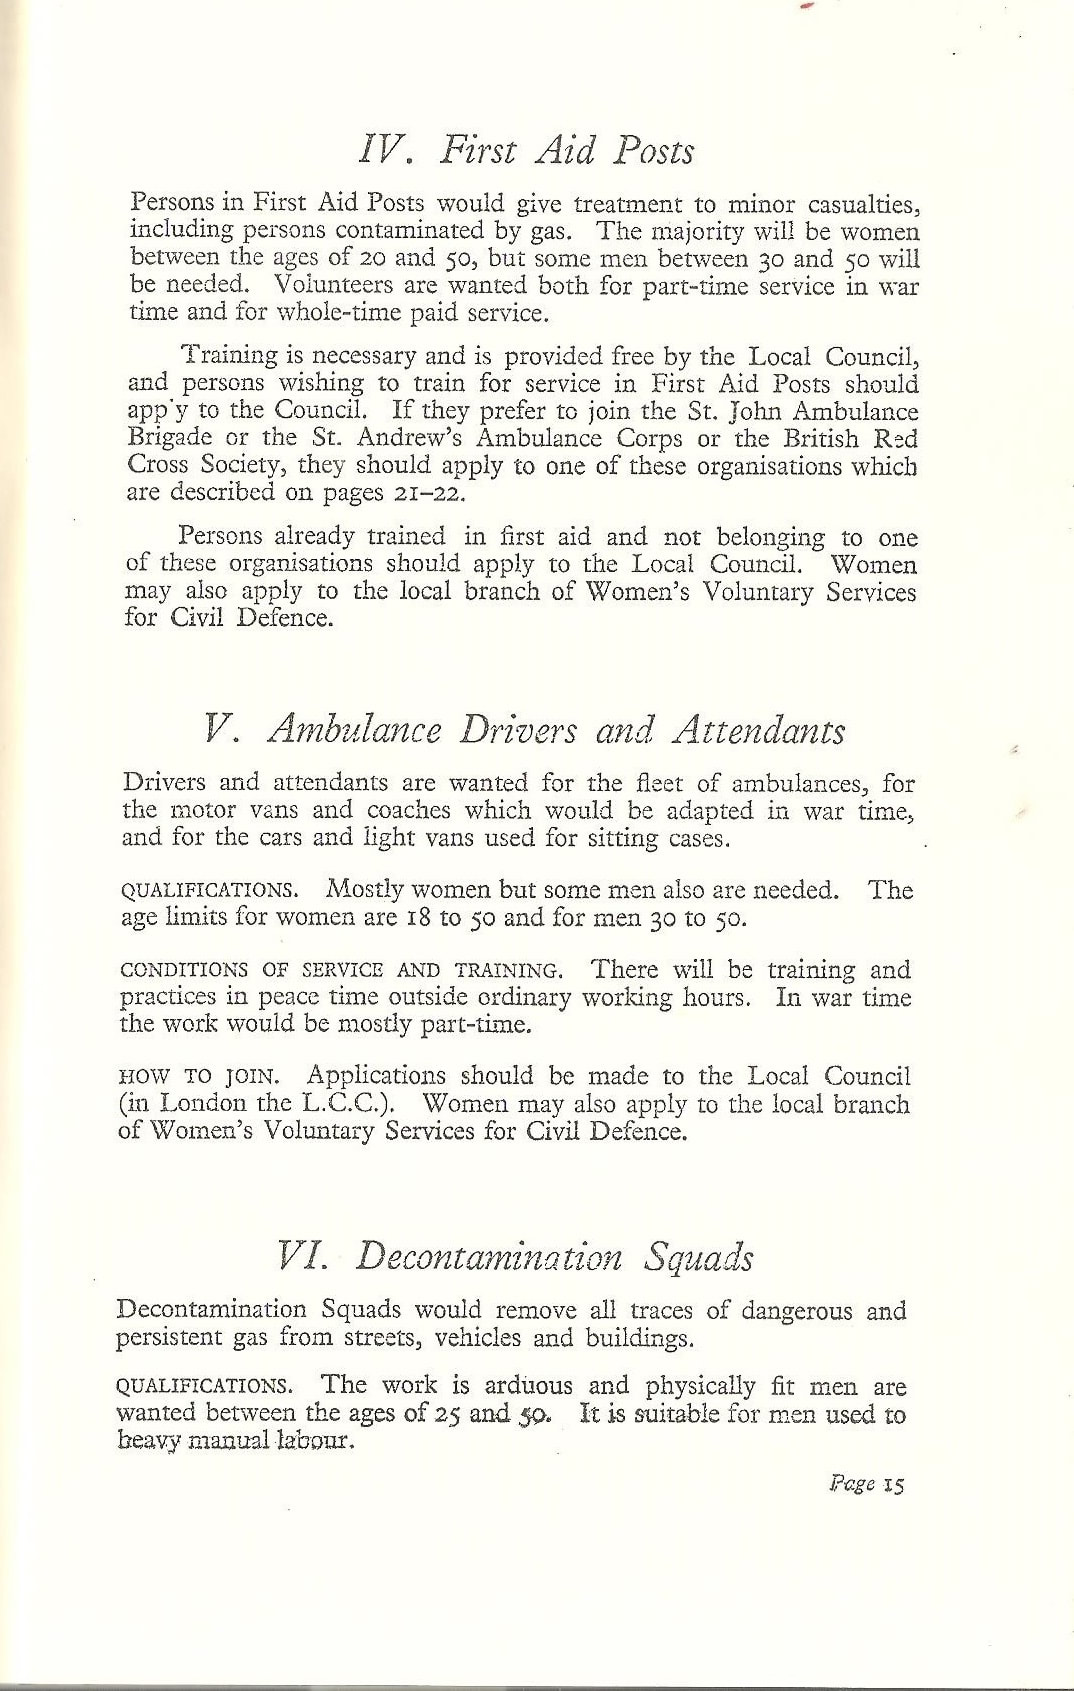 National Service Guide 1939 Air Raid Precautions - First Aid Posts, Ambulance and Decontamination Squads